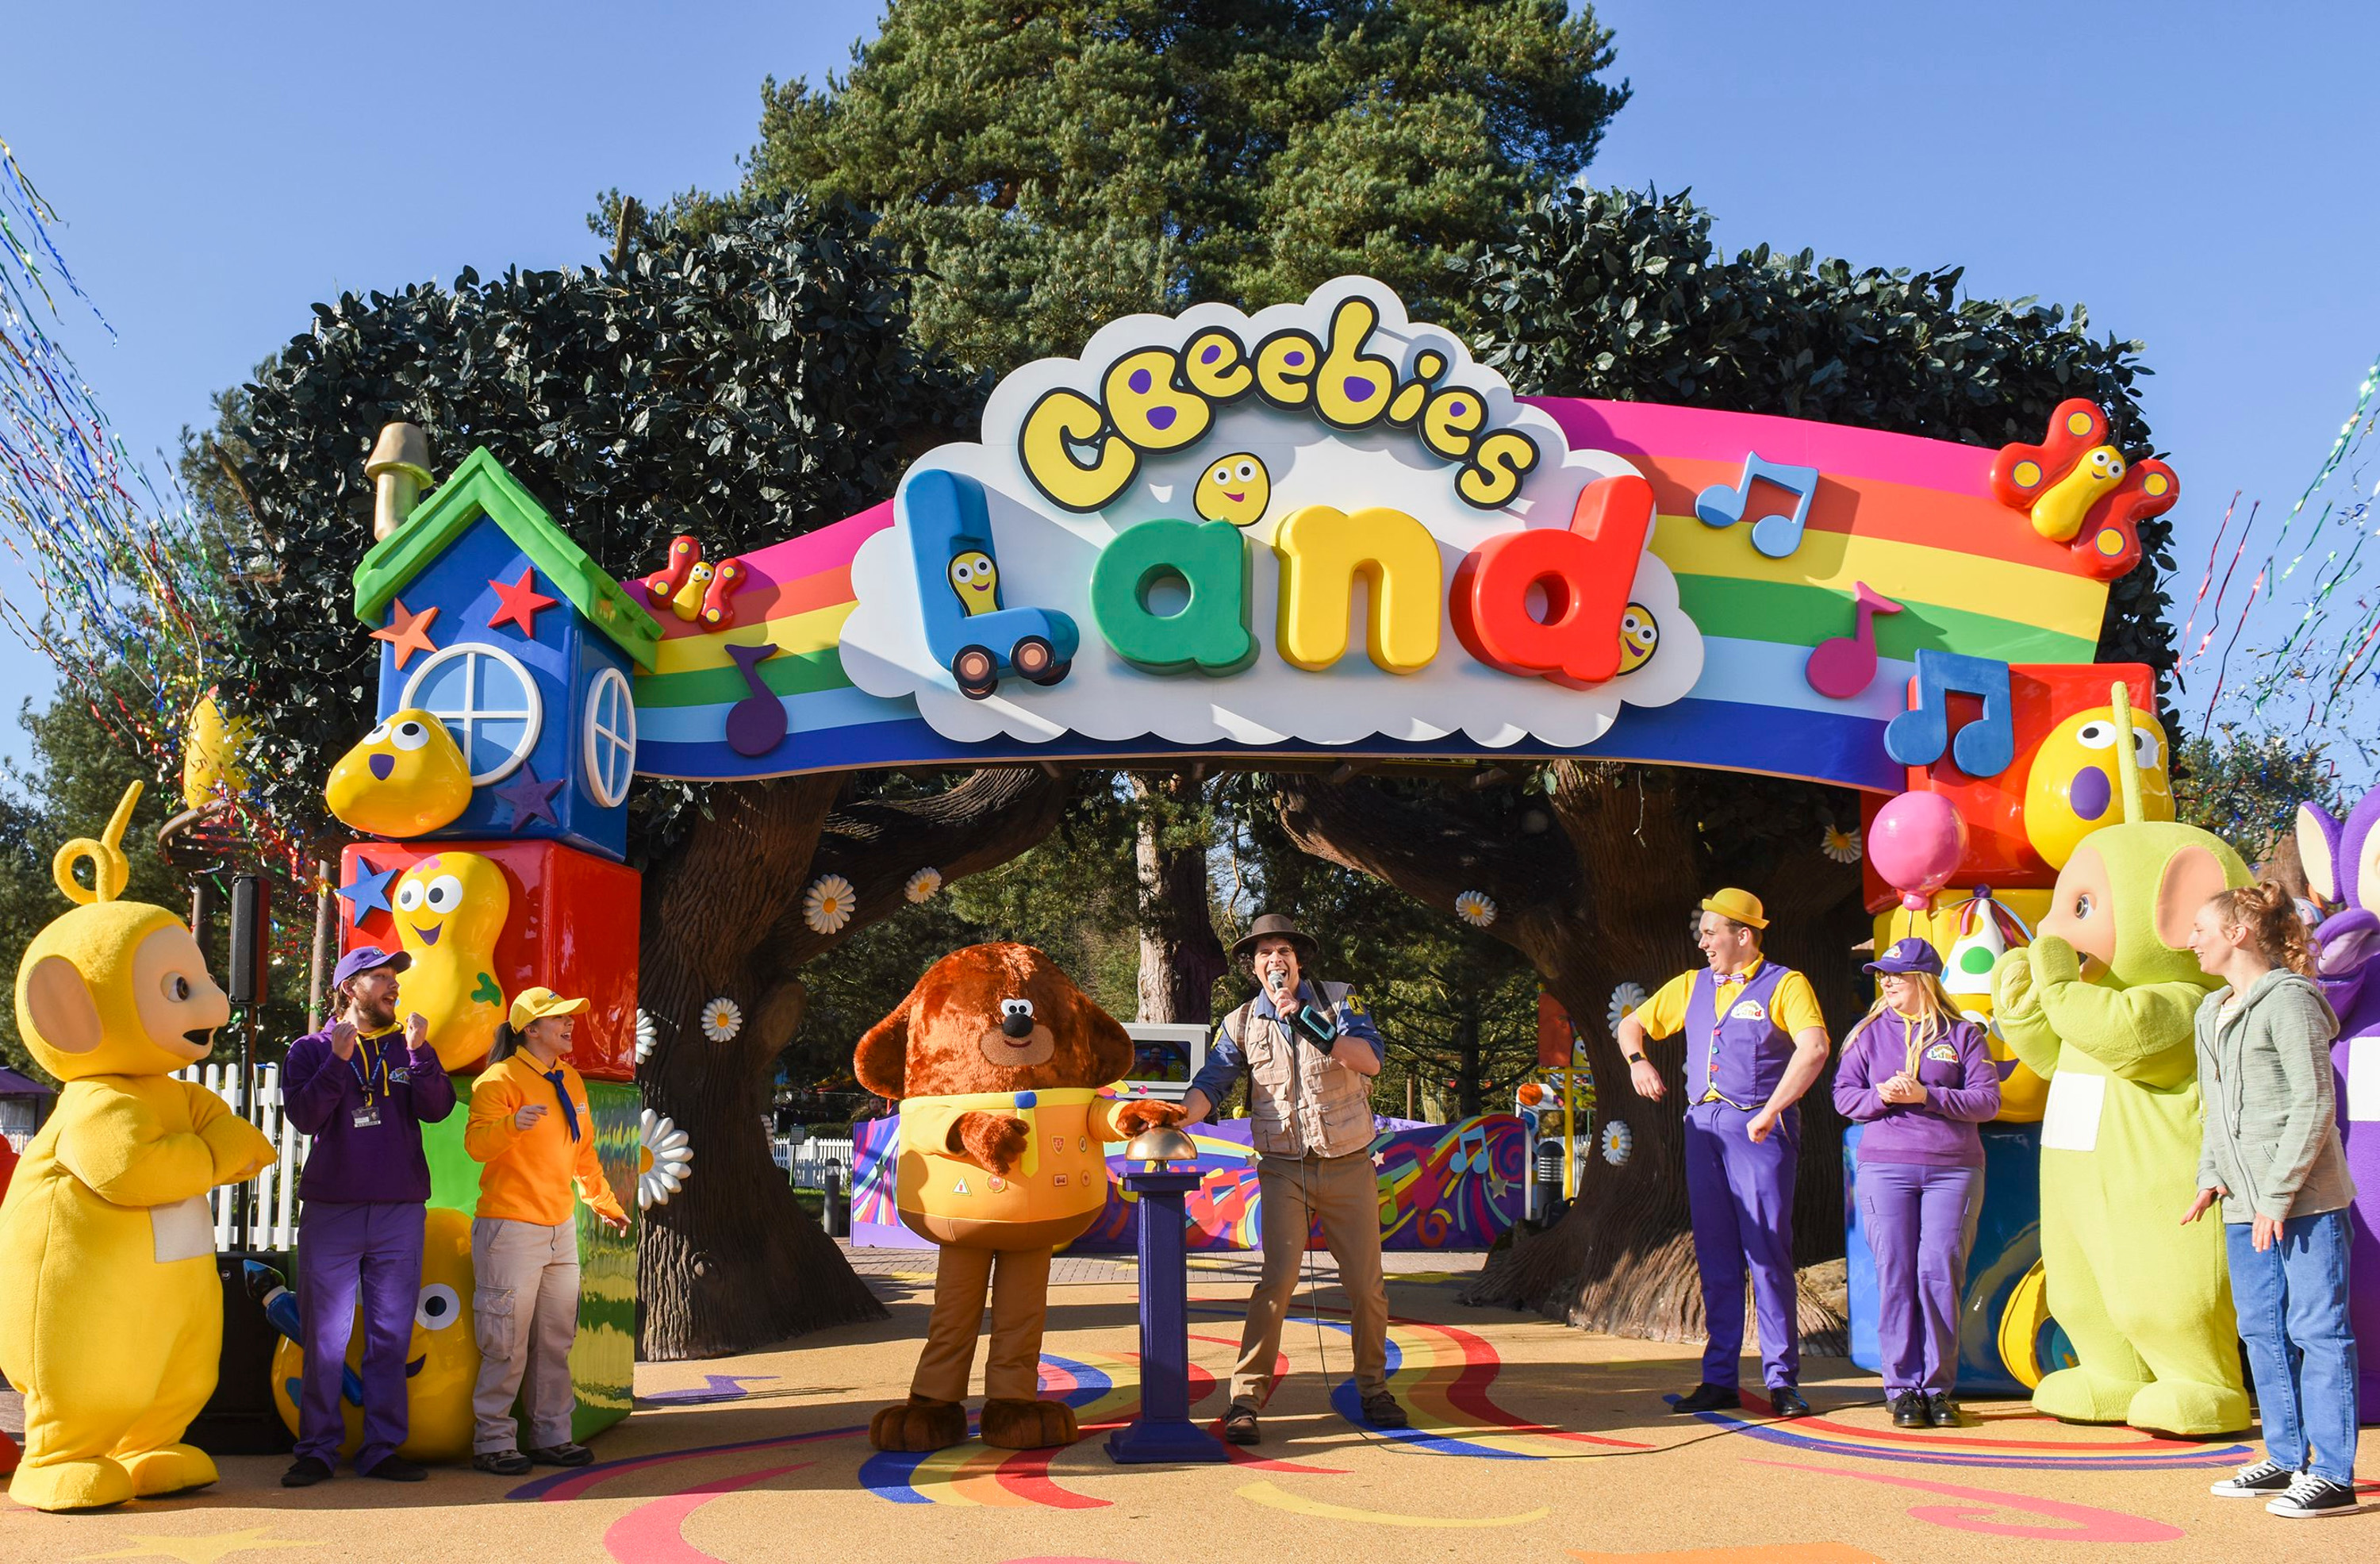 Alton Towers Resort reveals plans for a fantabulous feel-good summer to help the nation smile